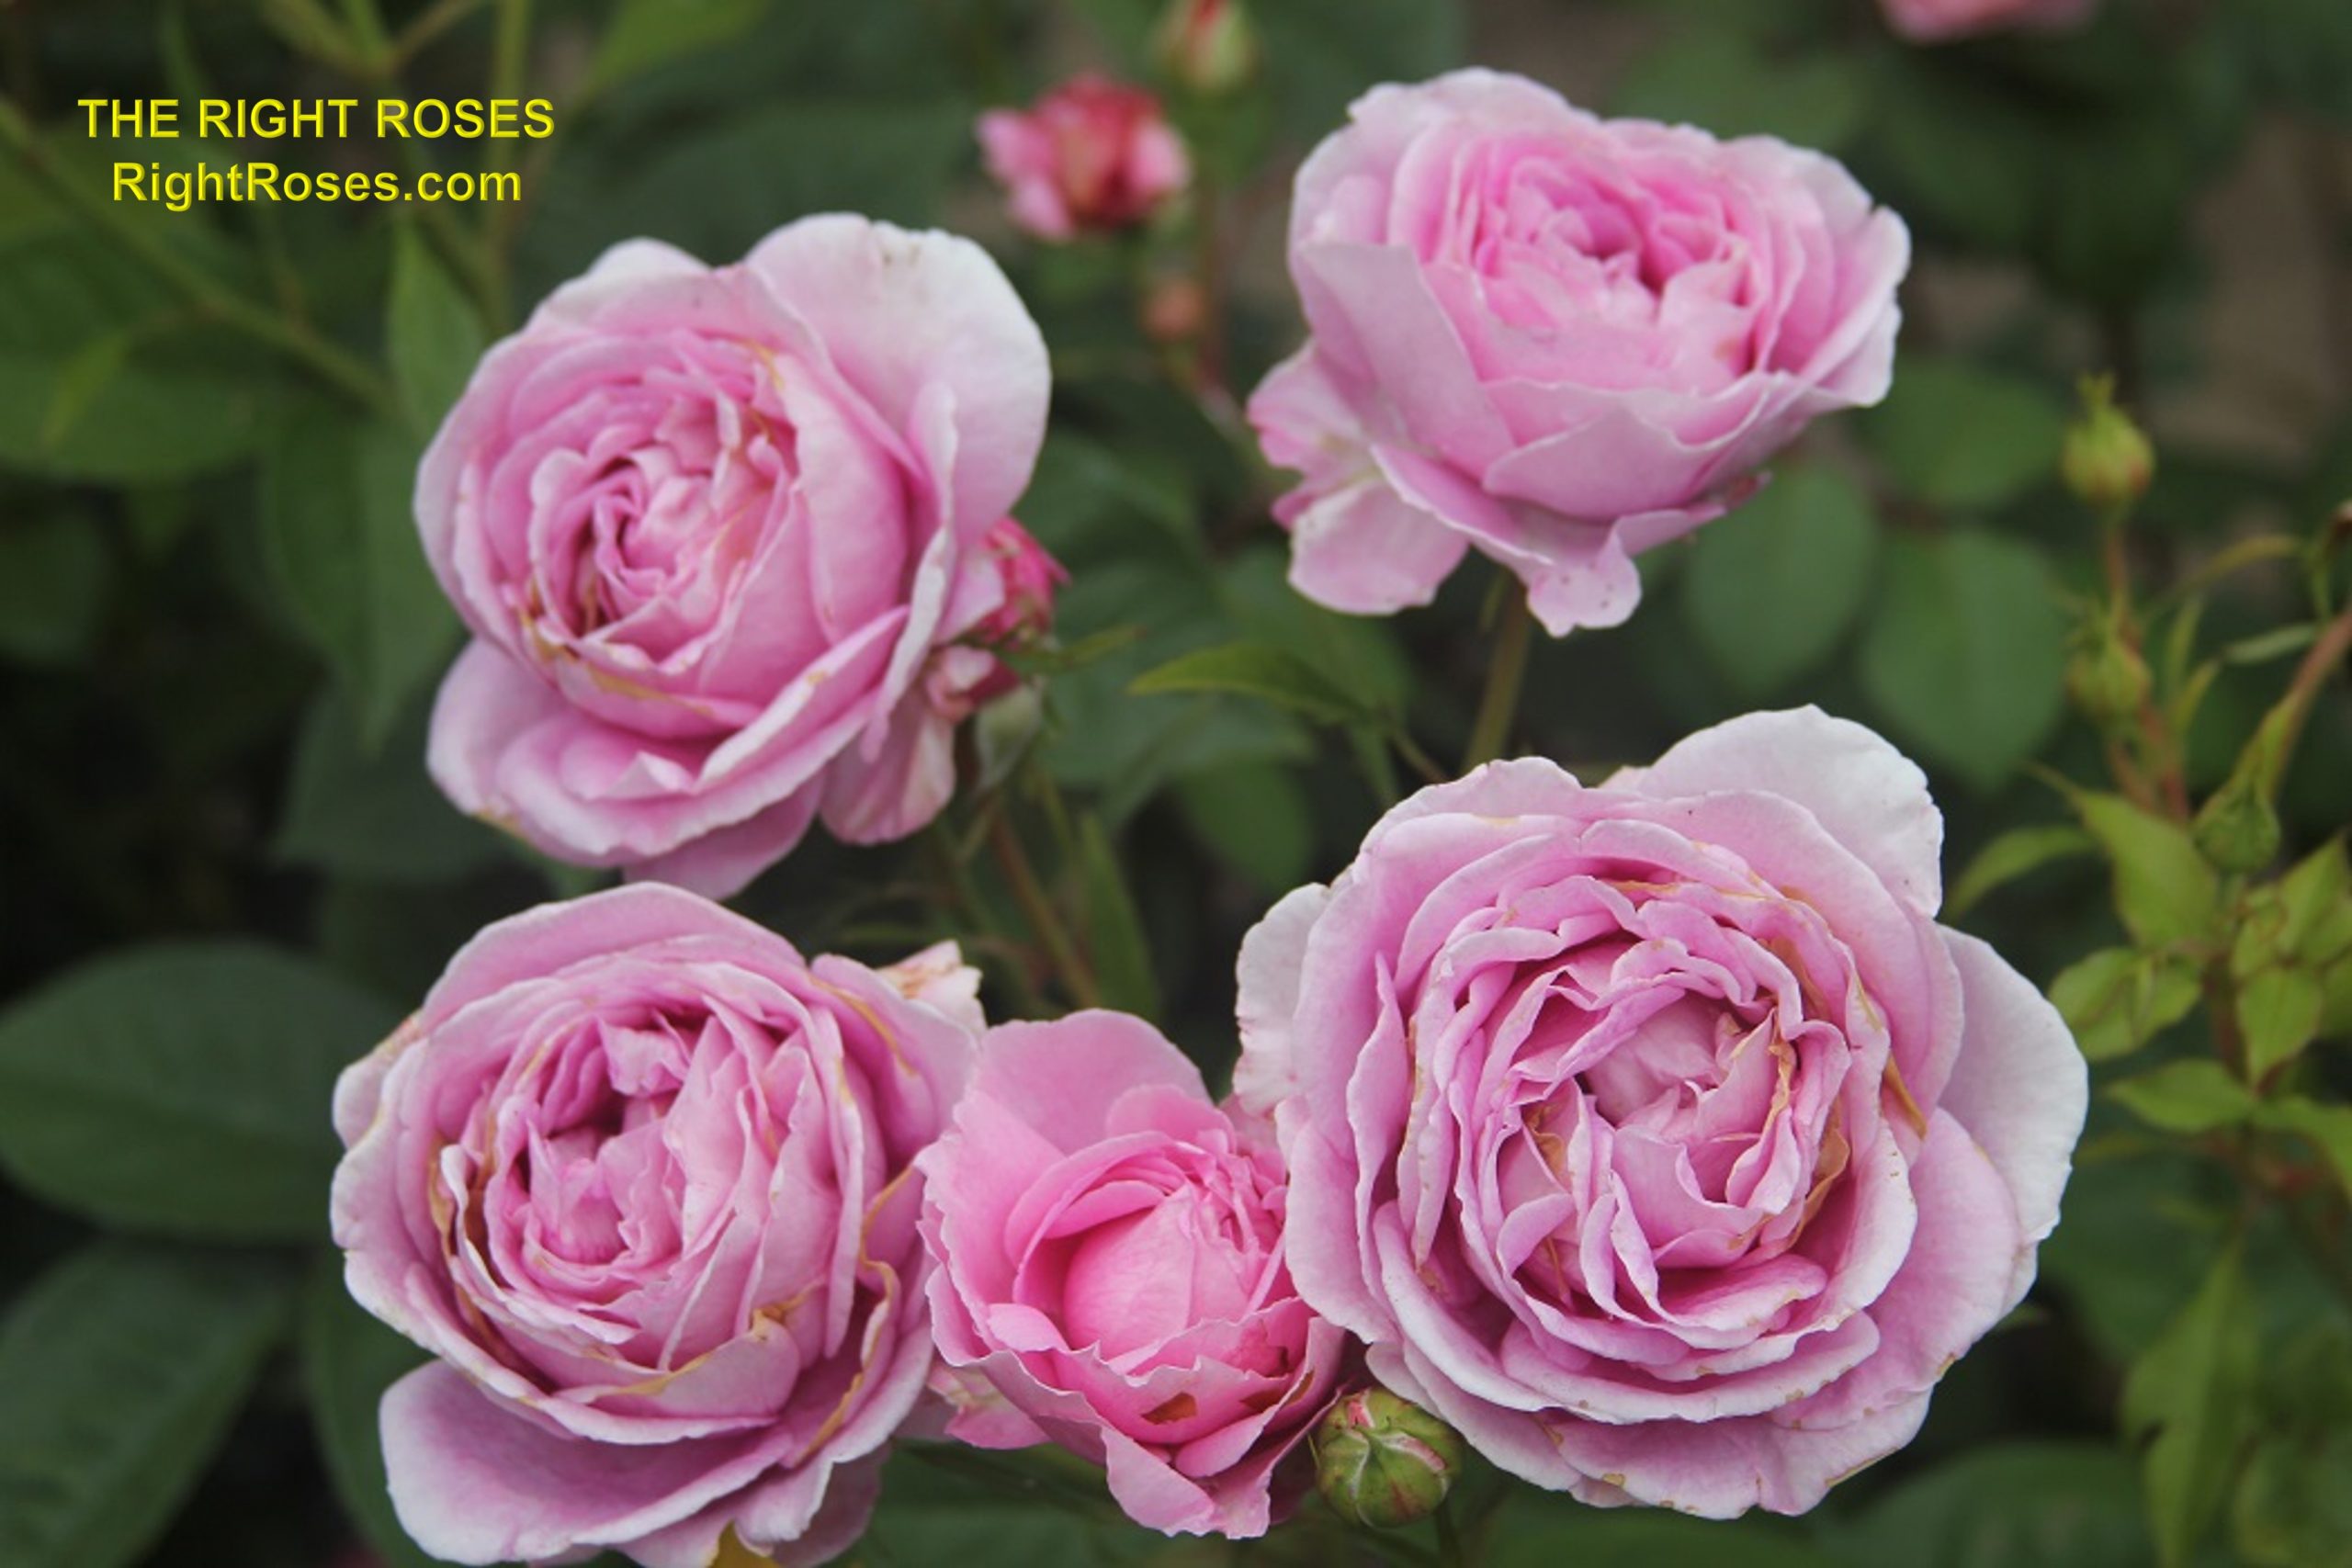 The Right Roses presents you with the best rose review of rose Königin Marie | Kordes Roses 2020. Millions of gardeners from all over the world have trusted our in-depth reviews. The Right Roses team uses our own, bespoke The Right Roses Score, which is the most comprehensive rose rating system in the world, to assess the overall quality of a rose. We review all the very best roses from all the best rose breeders such as Rosen Kordes, Rosen Tantau, Delbard, David Austin Roses. The Right Roses is also running the best gardening club for the very best connoisseur gardeners and garden designers at Righttify.com. At Righttify.com, connoisseur sellers can design gardens, provide gardening services, and provide garden consulting services.